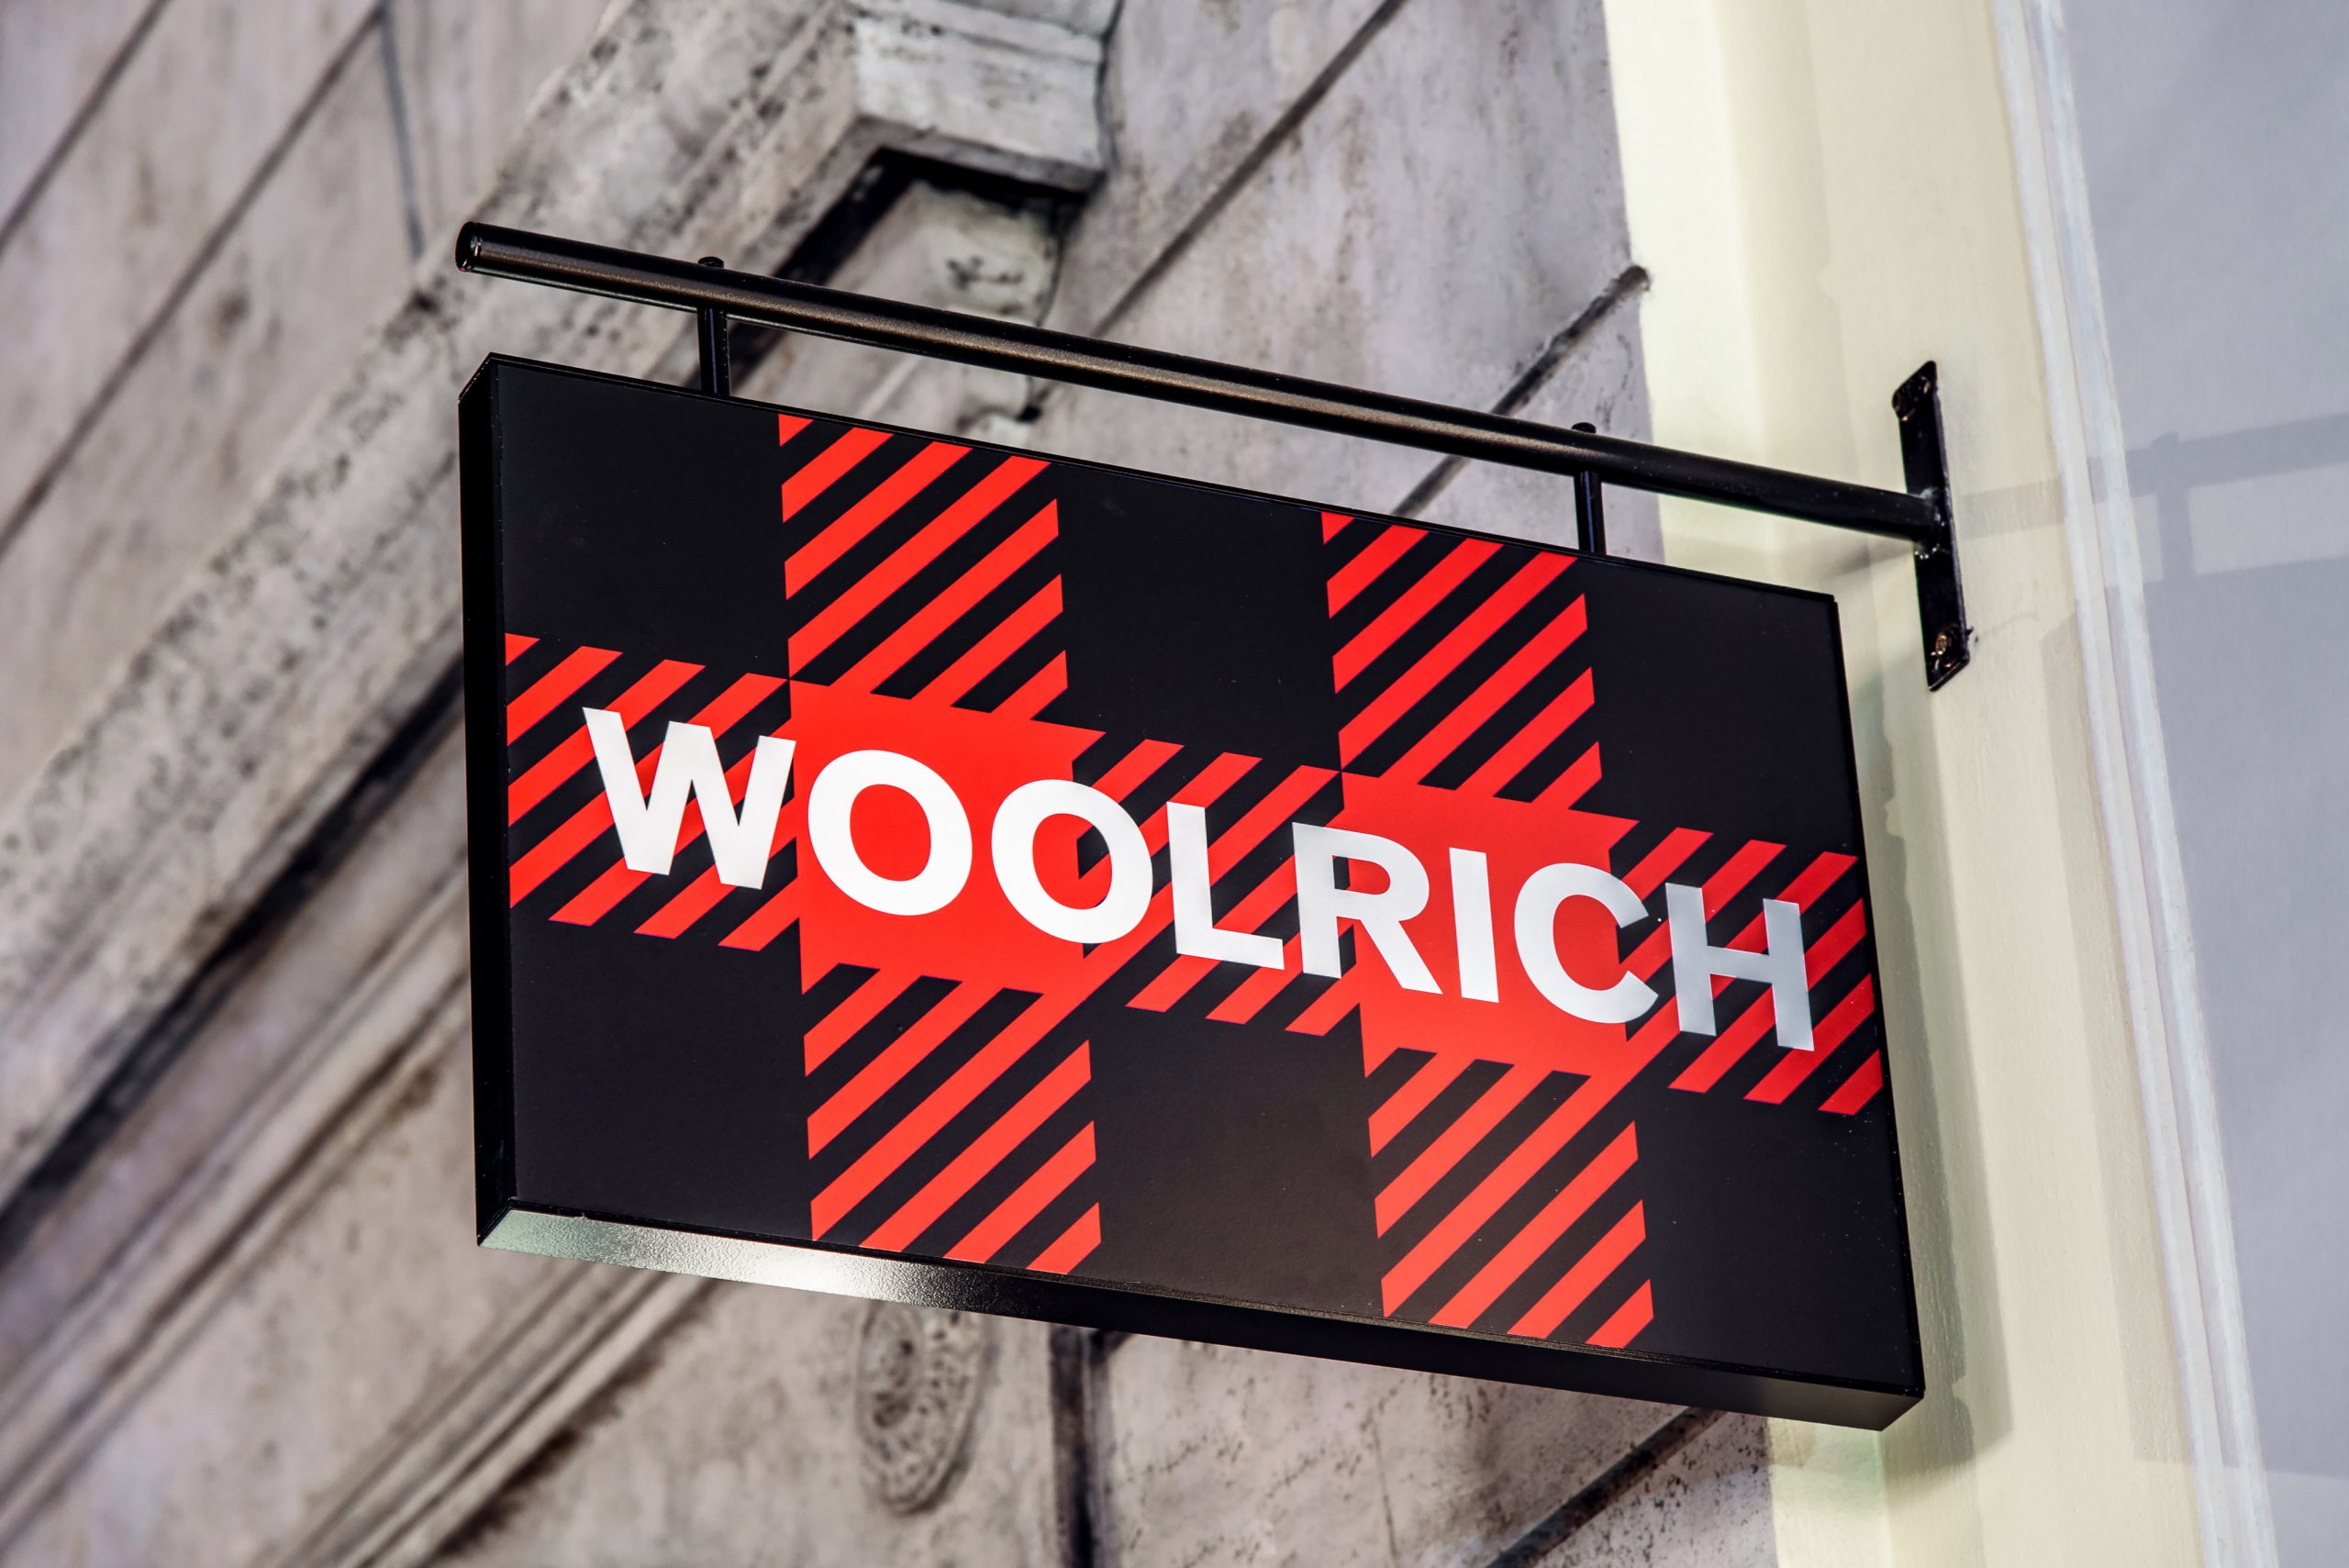 Woolrich store detail, Roma